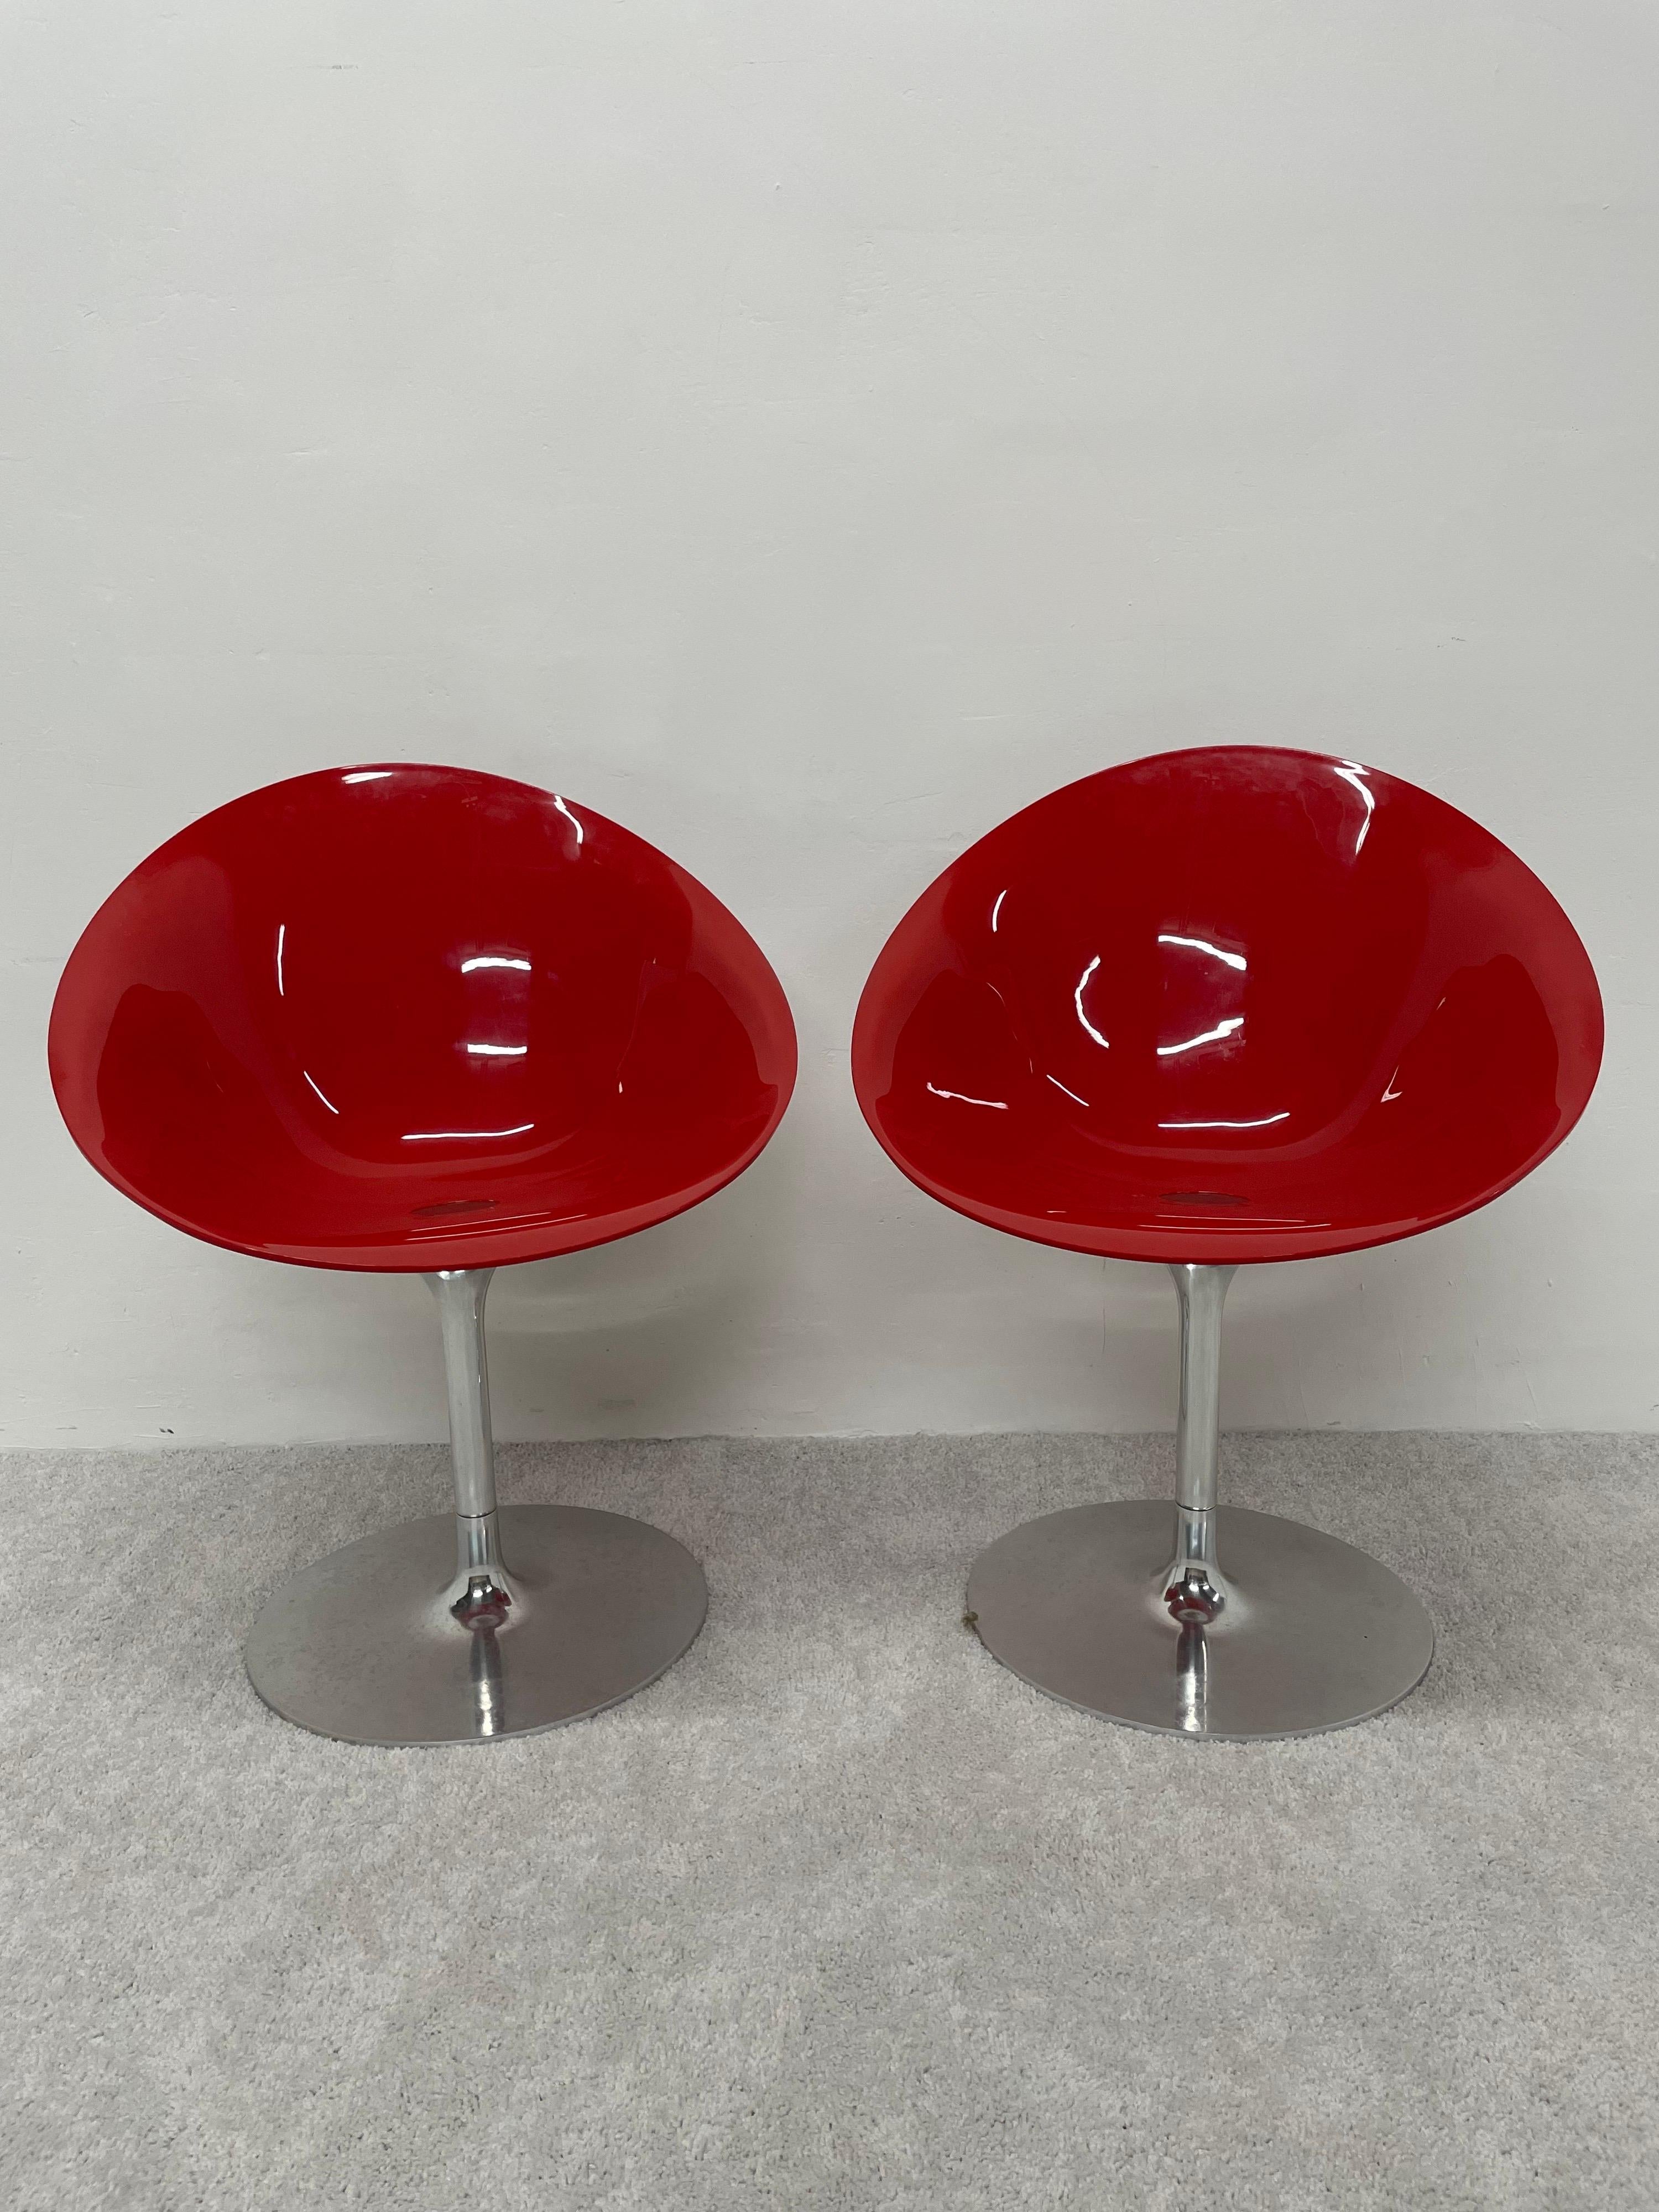 Pair of glossy red polycarbonate Eros chairs on aluminum trumpet swivel bases by Philippe Starck for Kartell. Made in Italy. The red polycarbonate seat is not transparent. 